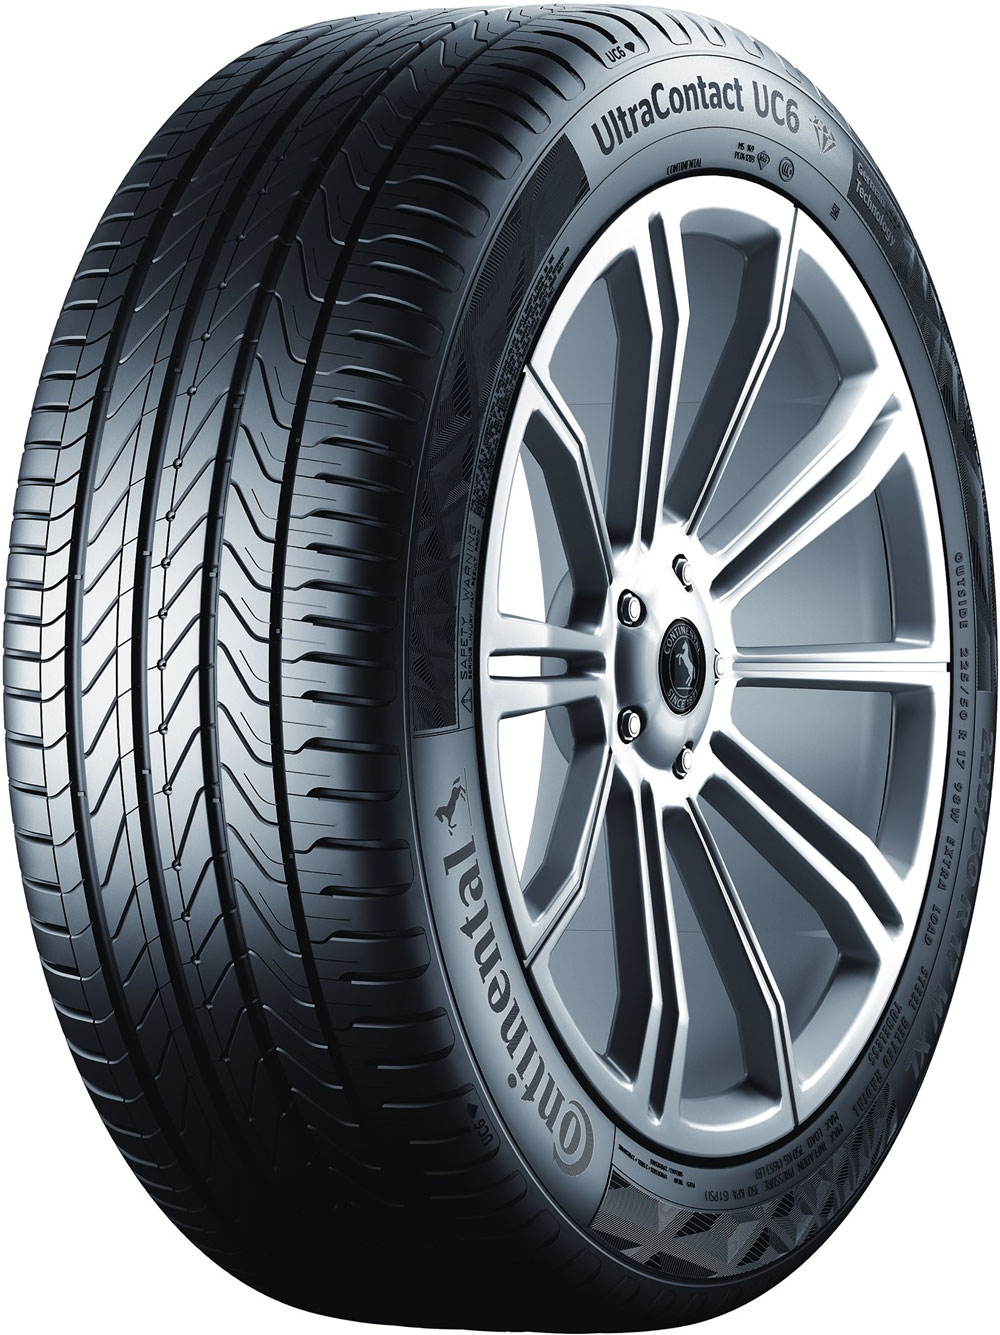 Anvelope auto CONTINENTAL UCXLFR XL 205/45 R16 87W